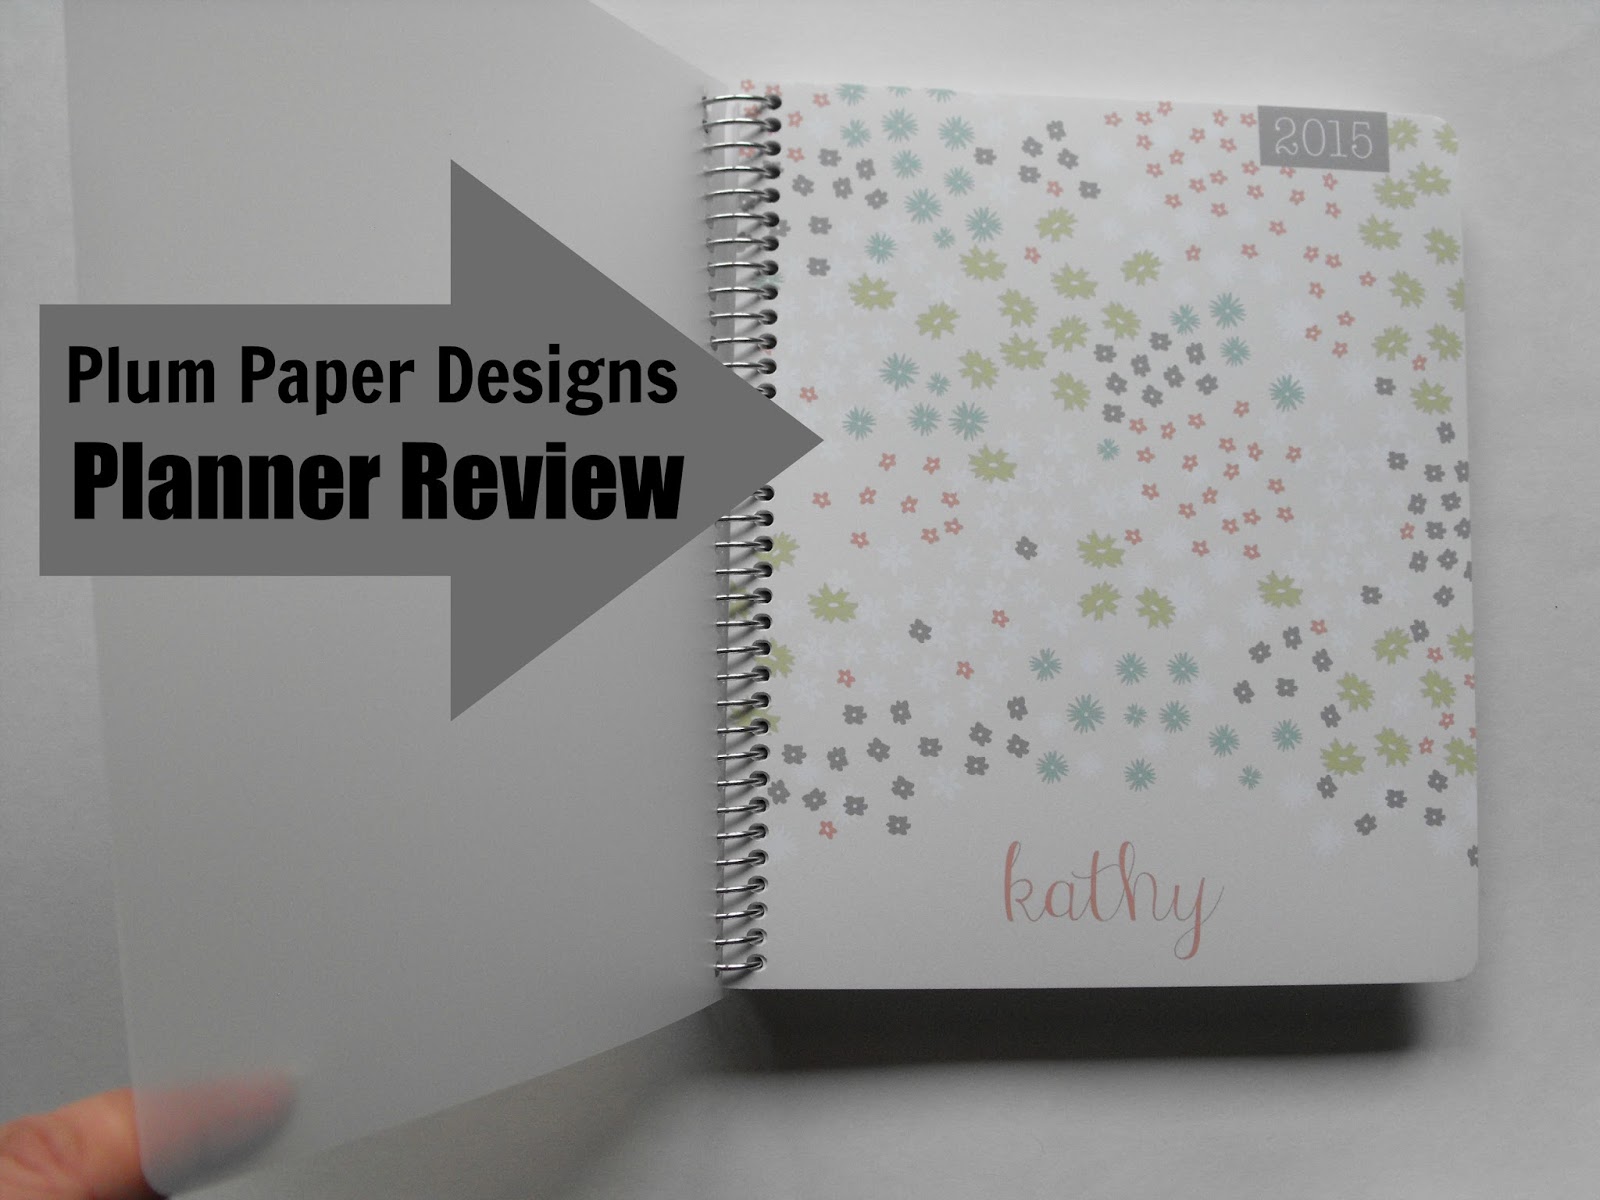 Smile for no reason: A Plum Paper Designs Planner Review